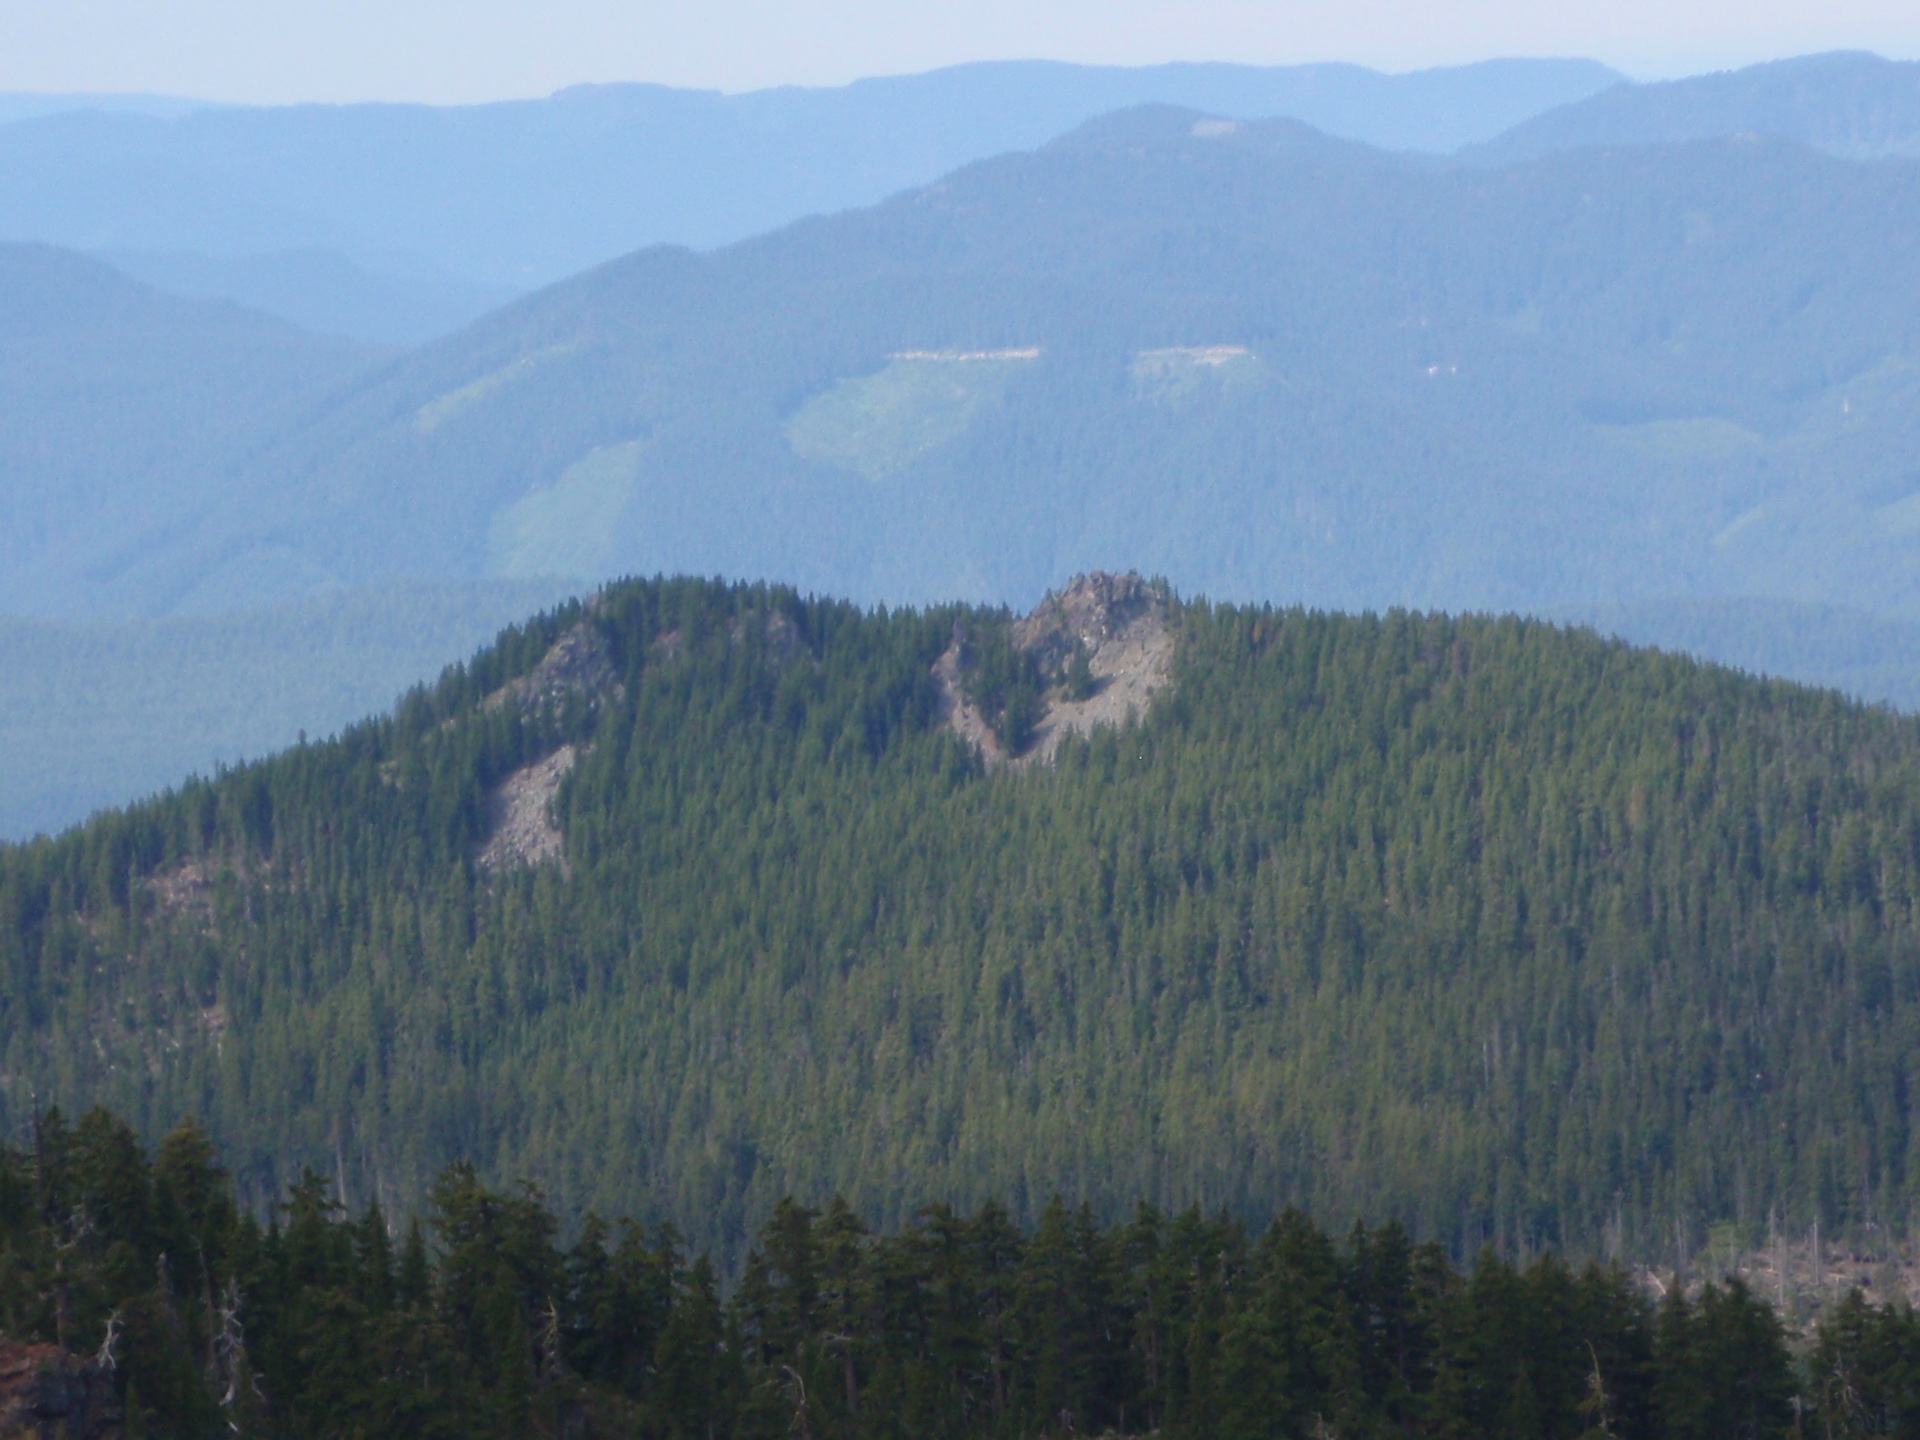 Seven years earlier, taken from SW ridge of the Husband. This was before the Substitute fire. Was also on the mountain a year later after that fire, but didn't take a photo of Substitute Point